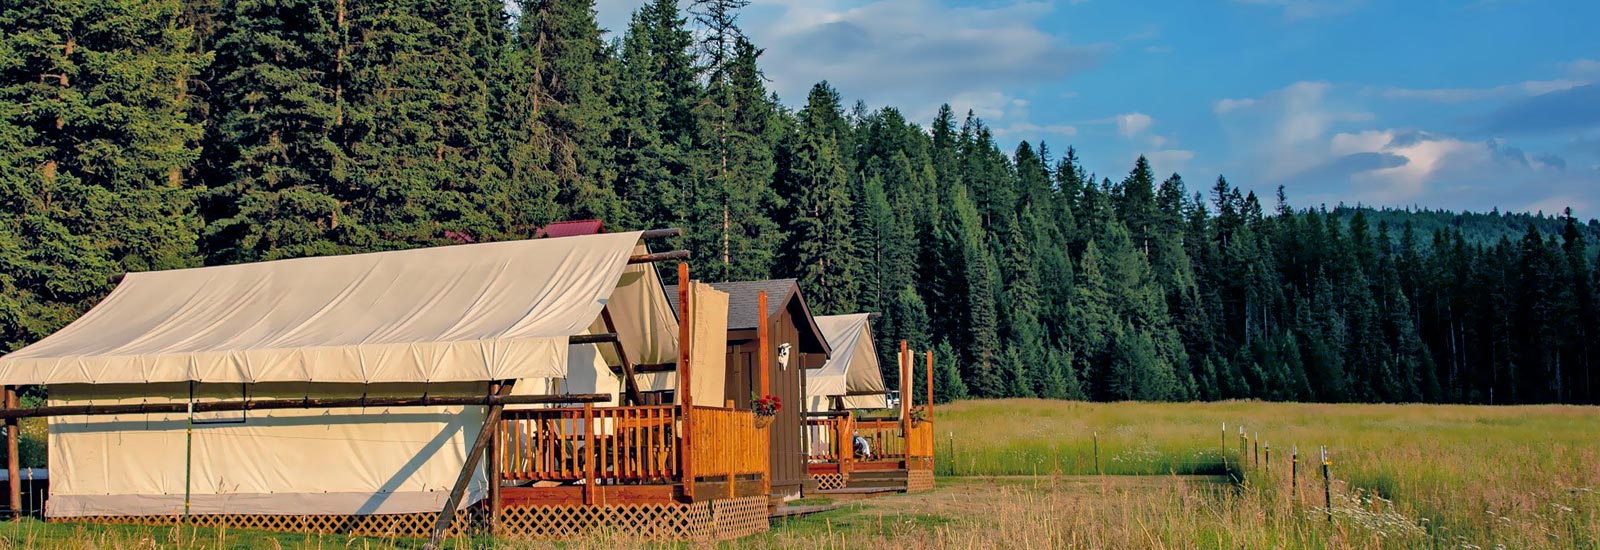 The Bar W Guest Ranch - Whitefish MT - Glamping Tents